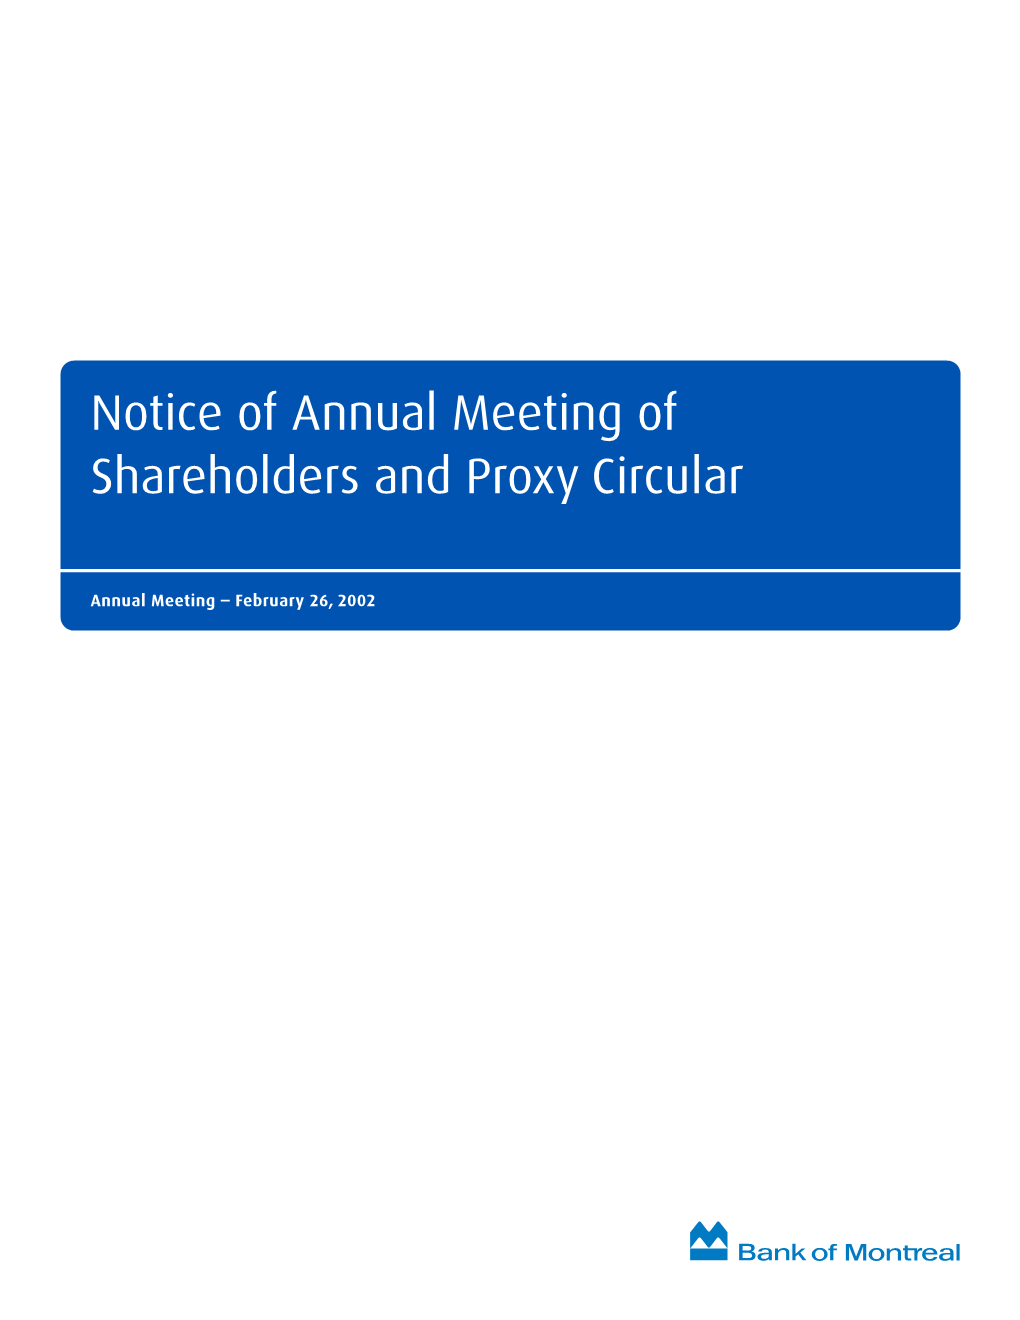 Notice of Annual Meeting of Shareholders and Proxy Circular